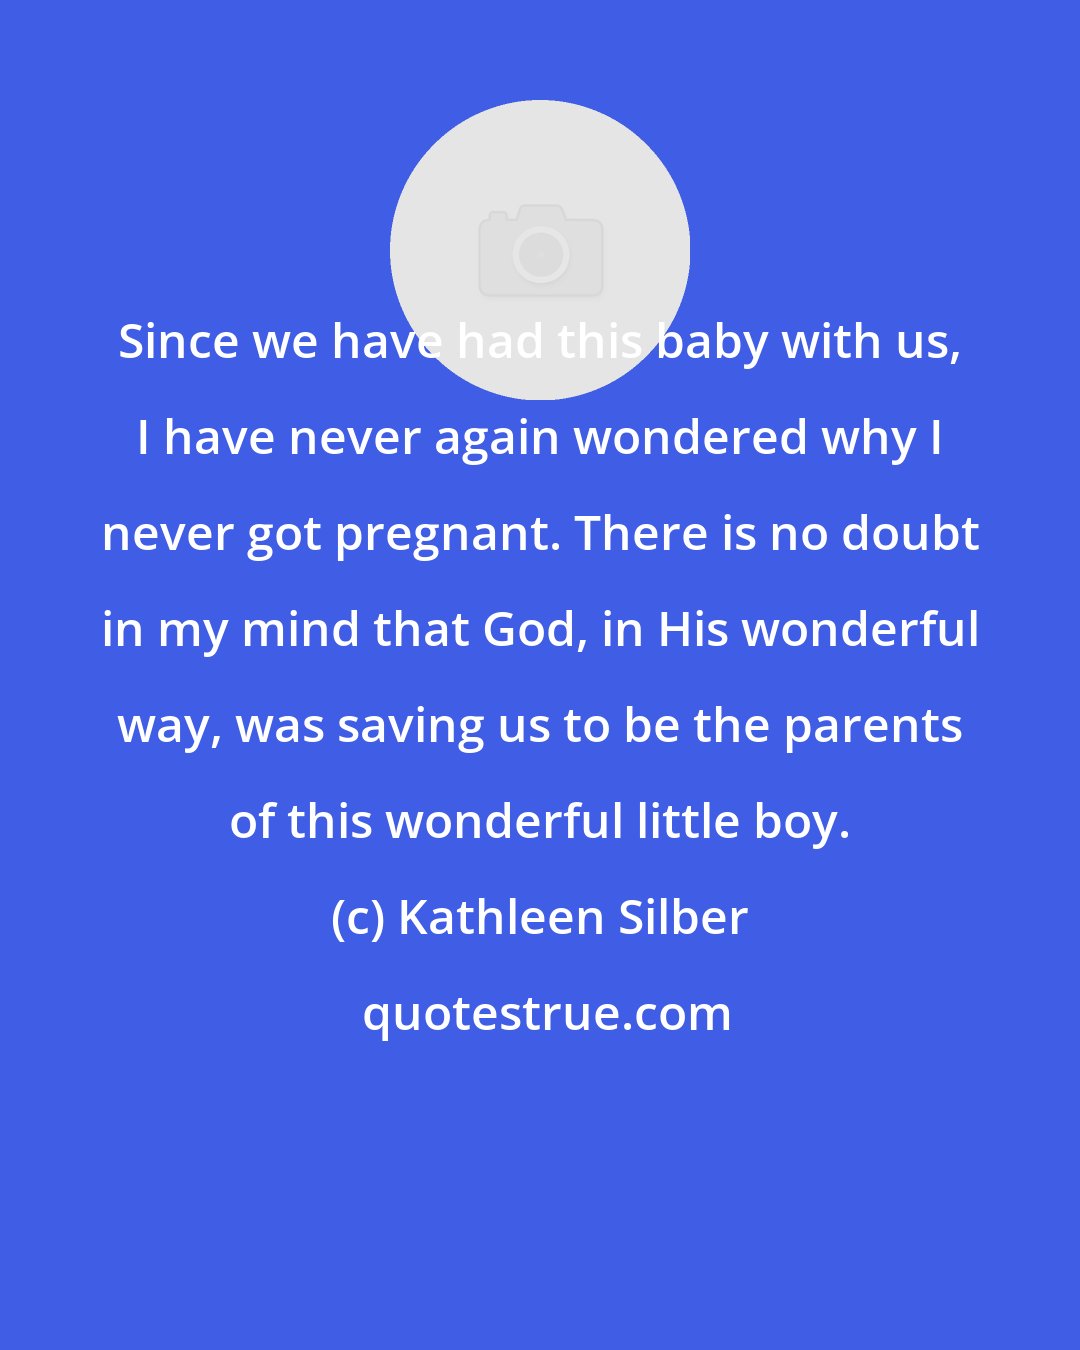 Kathleen Silber: Since we have had this baby with us, I have never again wondered why I never got pregnant. There is no doubt in my mind that God, in His wonderful way, was saving us to be the parents of this wonderful little boy.